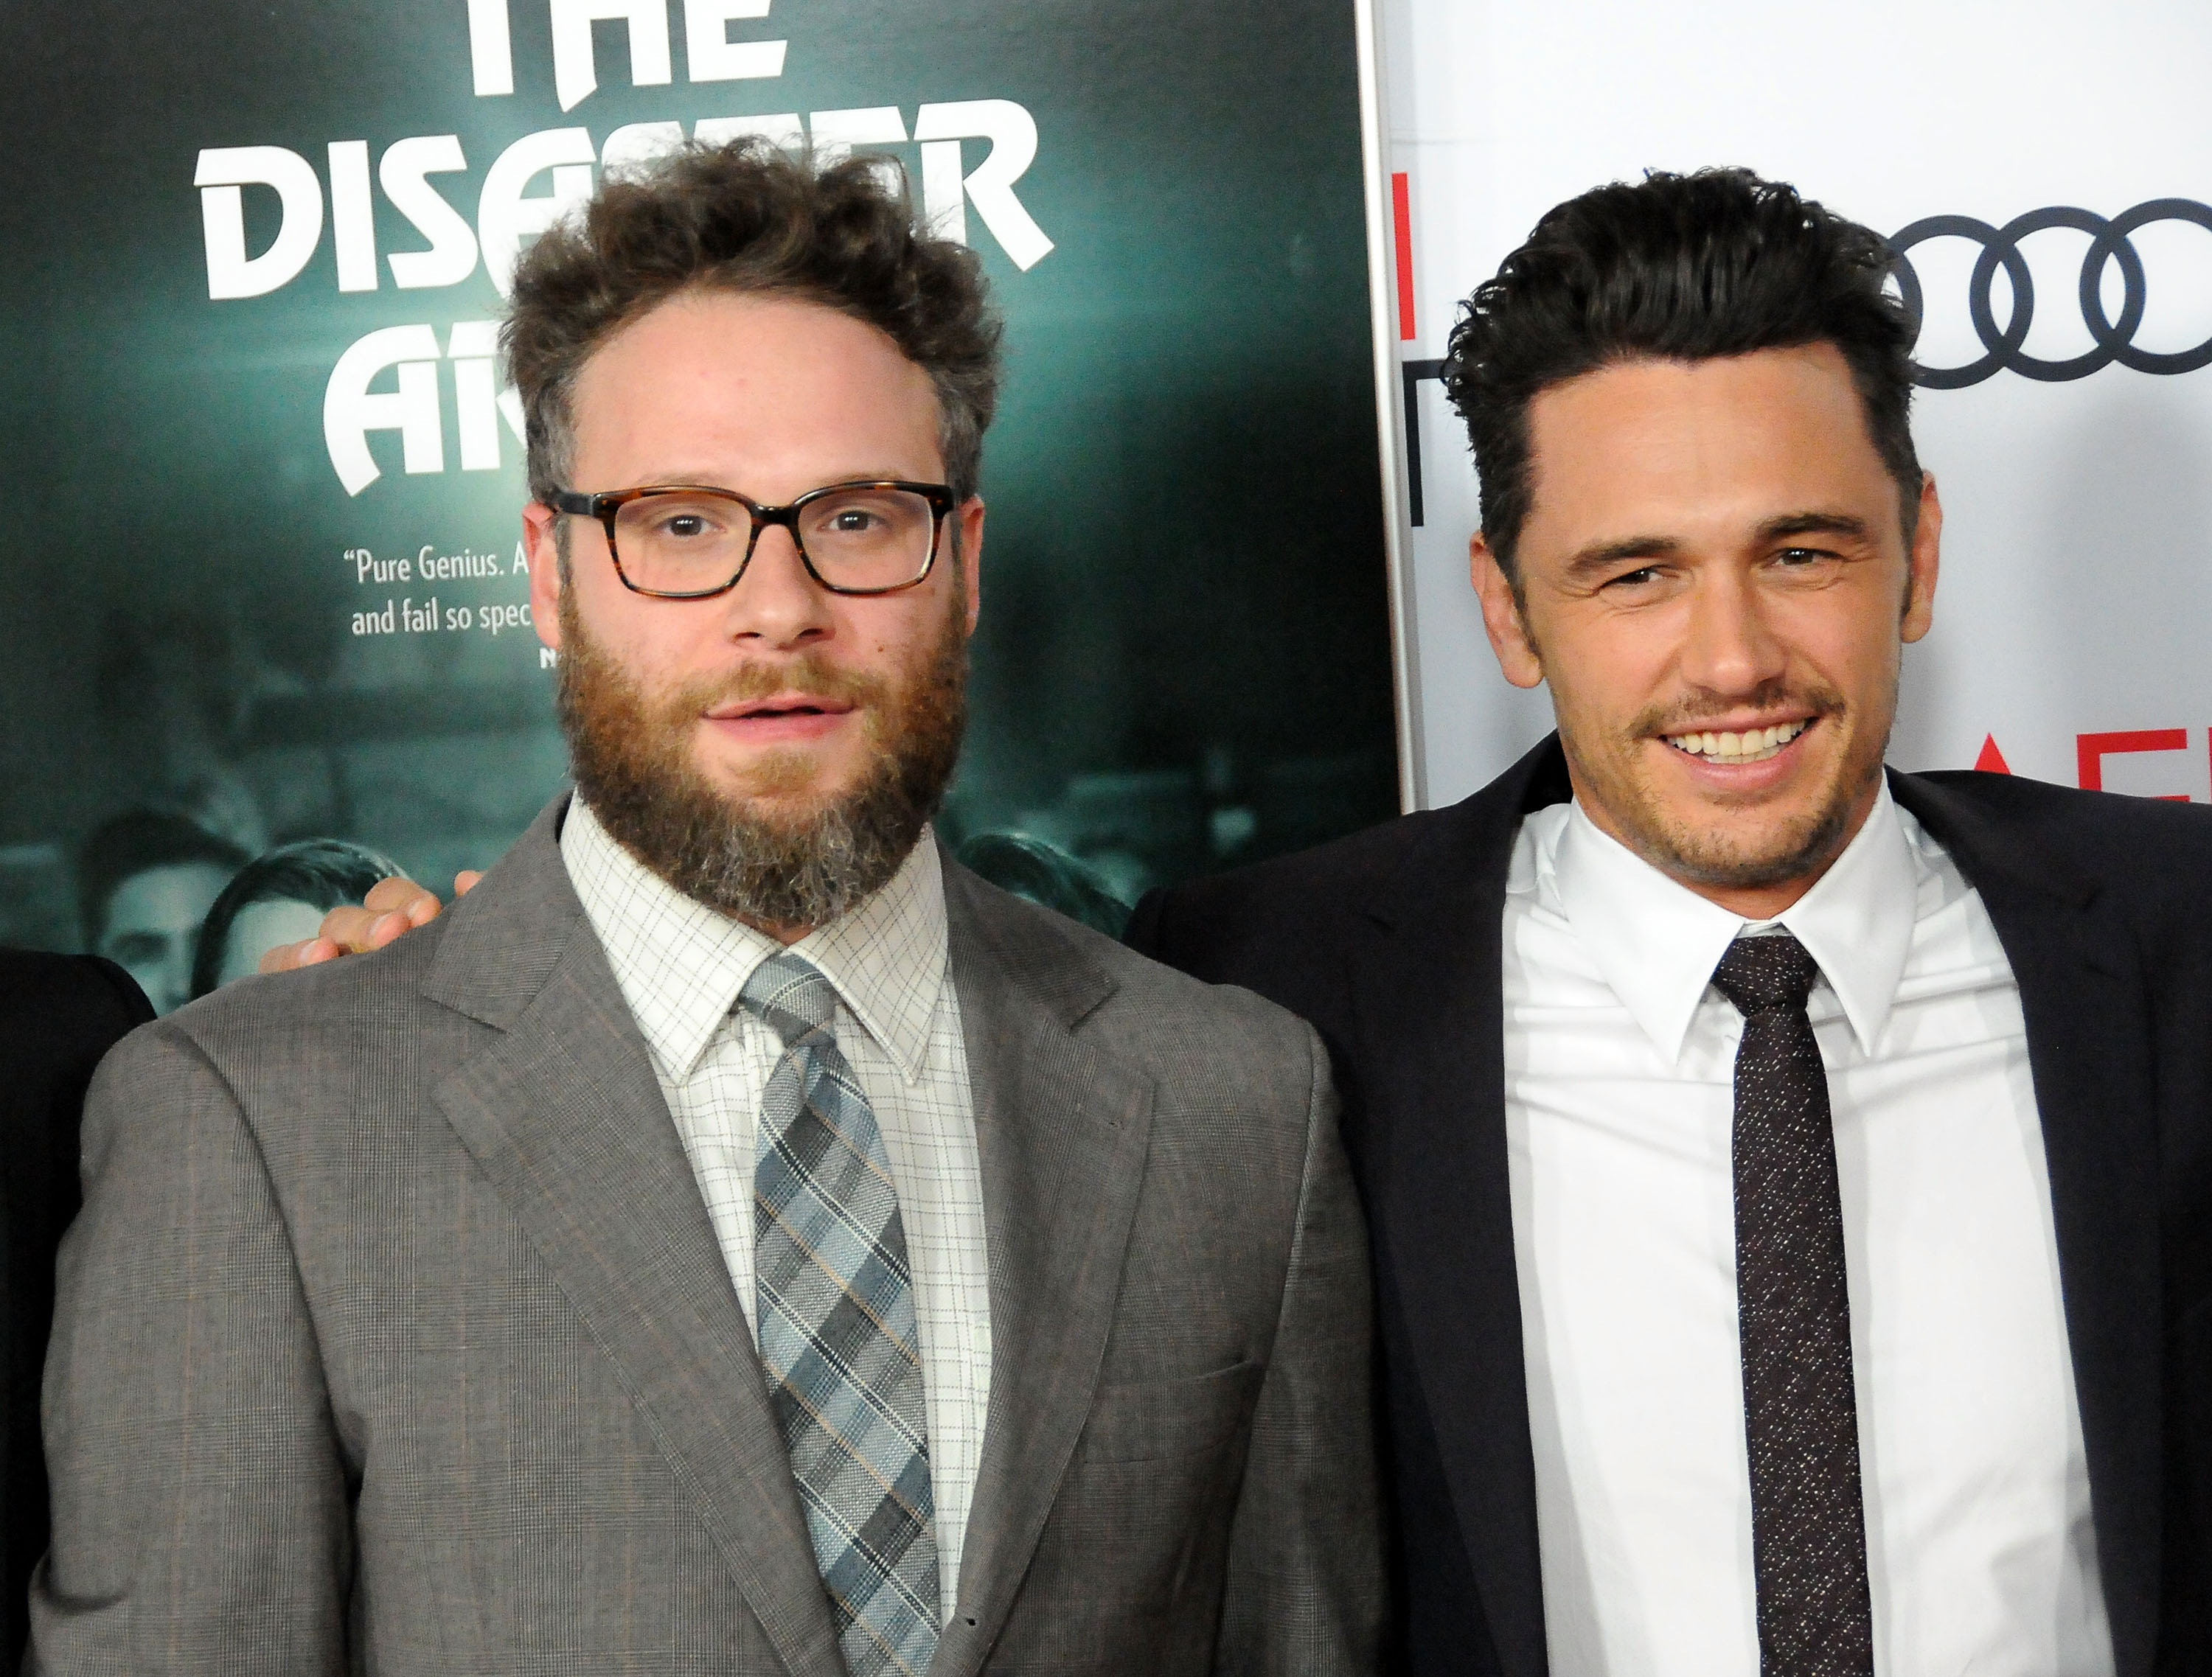 Seth Rogen and James Franco attend AFI FEST 2017 screening of 'The Disaster Artist' on November 12, 2017, in Hollywood, California.